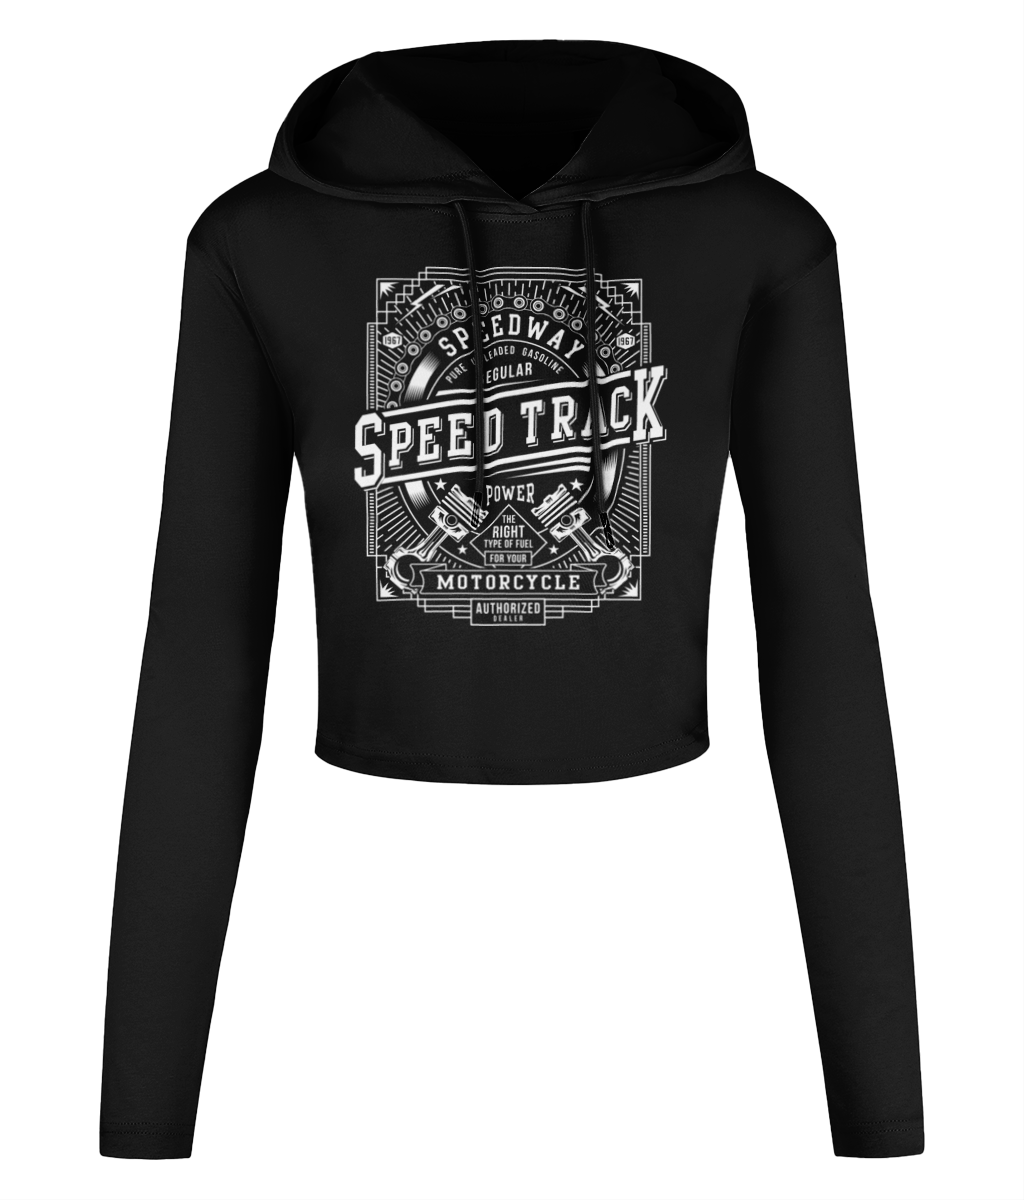 Speed Track – Women’s Cropped Hooded T-shirt